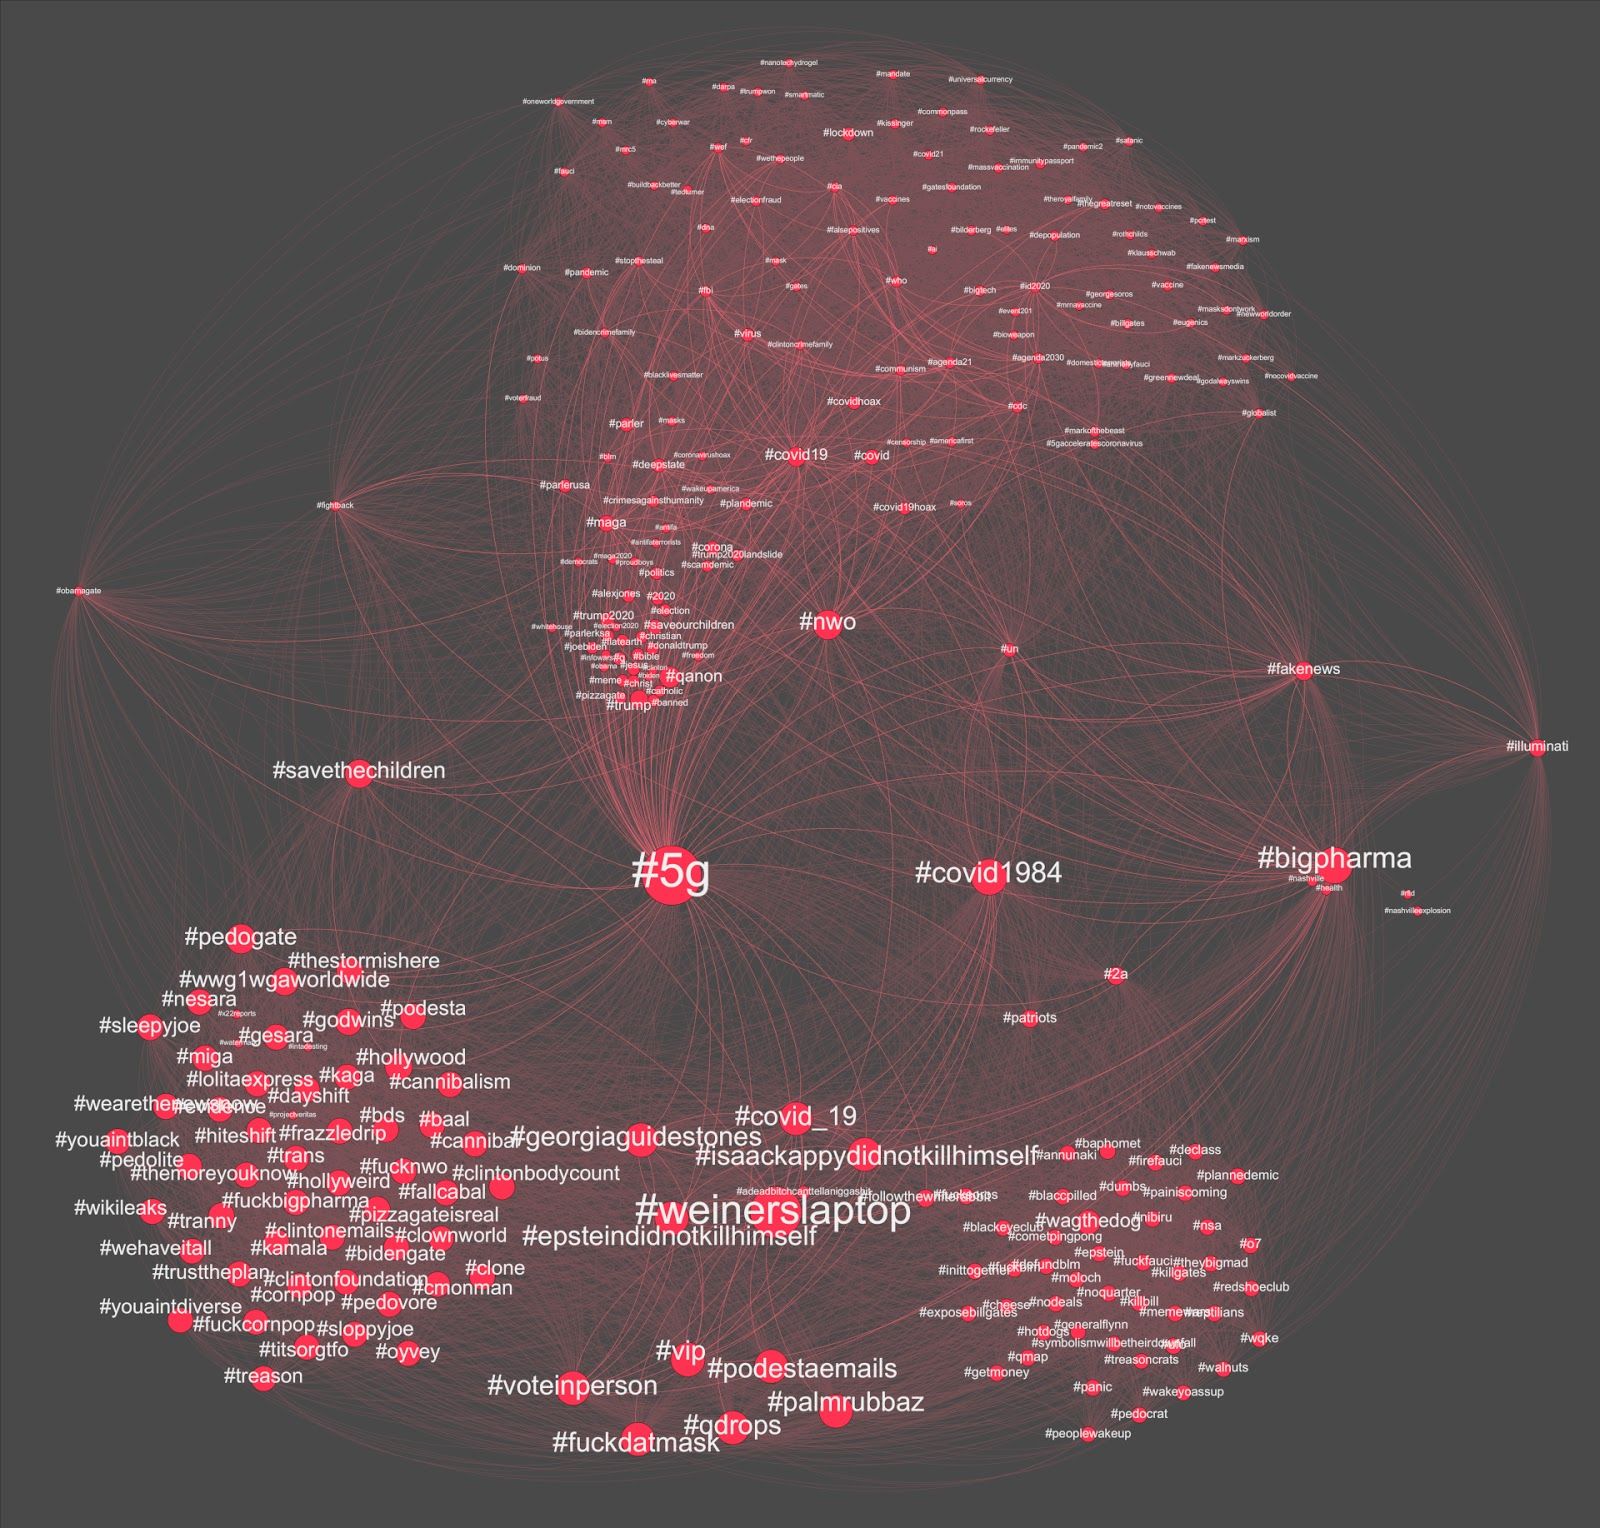 Figure 2: Co-hashtag network visualization of top 200 most engaged posts on Parler